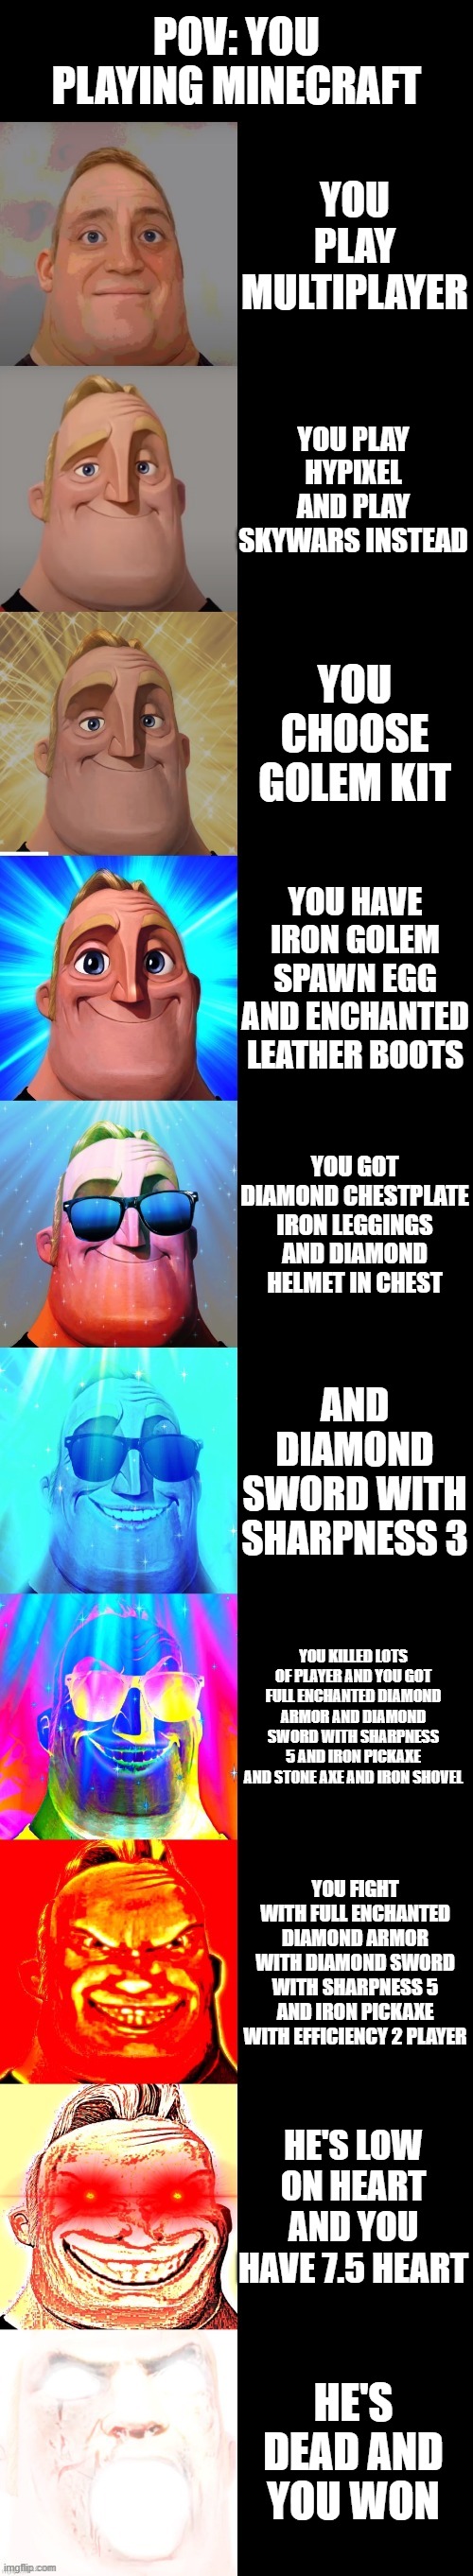 mr incredible becoming canny you play hypixel | POV: YOU PLAYING MINECRAFT; YOU PLAY MULTIPLAYER; YOU PLAY HYPIXEL AND PLAY SKYWARS INSTEAD; YOU CHOOSE GOLEM KIT; YOU HAVE IRON GOLEM SPAWN EGG AND ENCHANTED LEATHER BOOTS; YOU GOT DIAMOND CHESTPLATE IRON LEGGINGS AND DIAMOND HELMET IN CHEST; AND DIAMOND SWORD WITH SHARPNESS 3; YOU KILLED LOTS OF PLAYER AND YOU GOT FULL ENCHANTED DIAMOND ARMOR AND DIAMOND SWORD WITH SHARPNESS 5 AND IRON PICKAXE AND STONE AXE AND IRON SHOVEL; YOU FIGHT WITH FULL ENCHANTED DIAMOND ARMOR WITH DIAMOND SWORD WITH SHARPNESS 5 AND IRON PICKAXE WITH EFFICIENCY 2 PLAYER; HE'S LOW ON HEART AND YOU HAVE 7.5 HEART; HE'S DEAD AND YOU WON | image tagged in mr incredible becoming canny | made w/ Imgflip meme maker